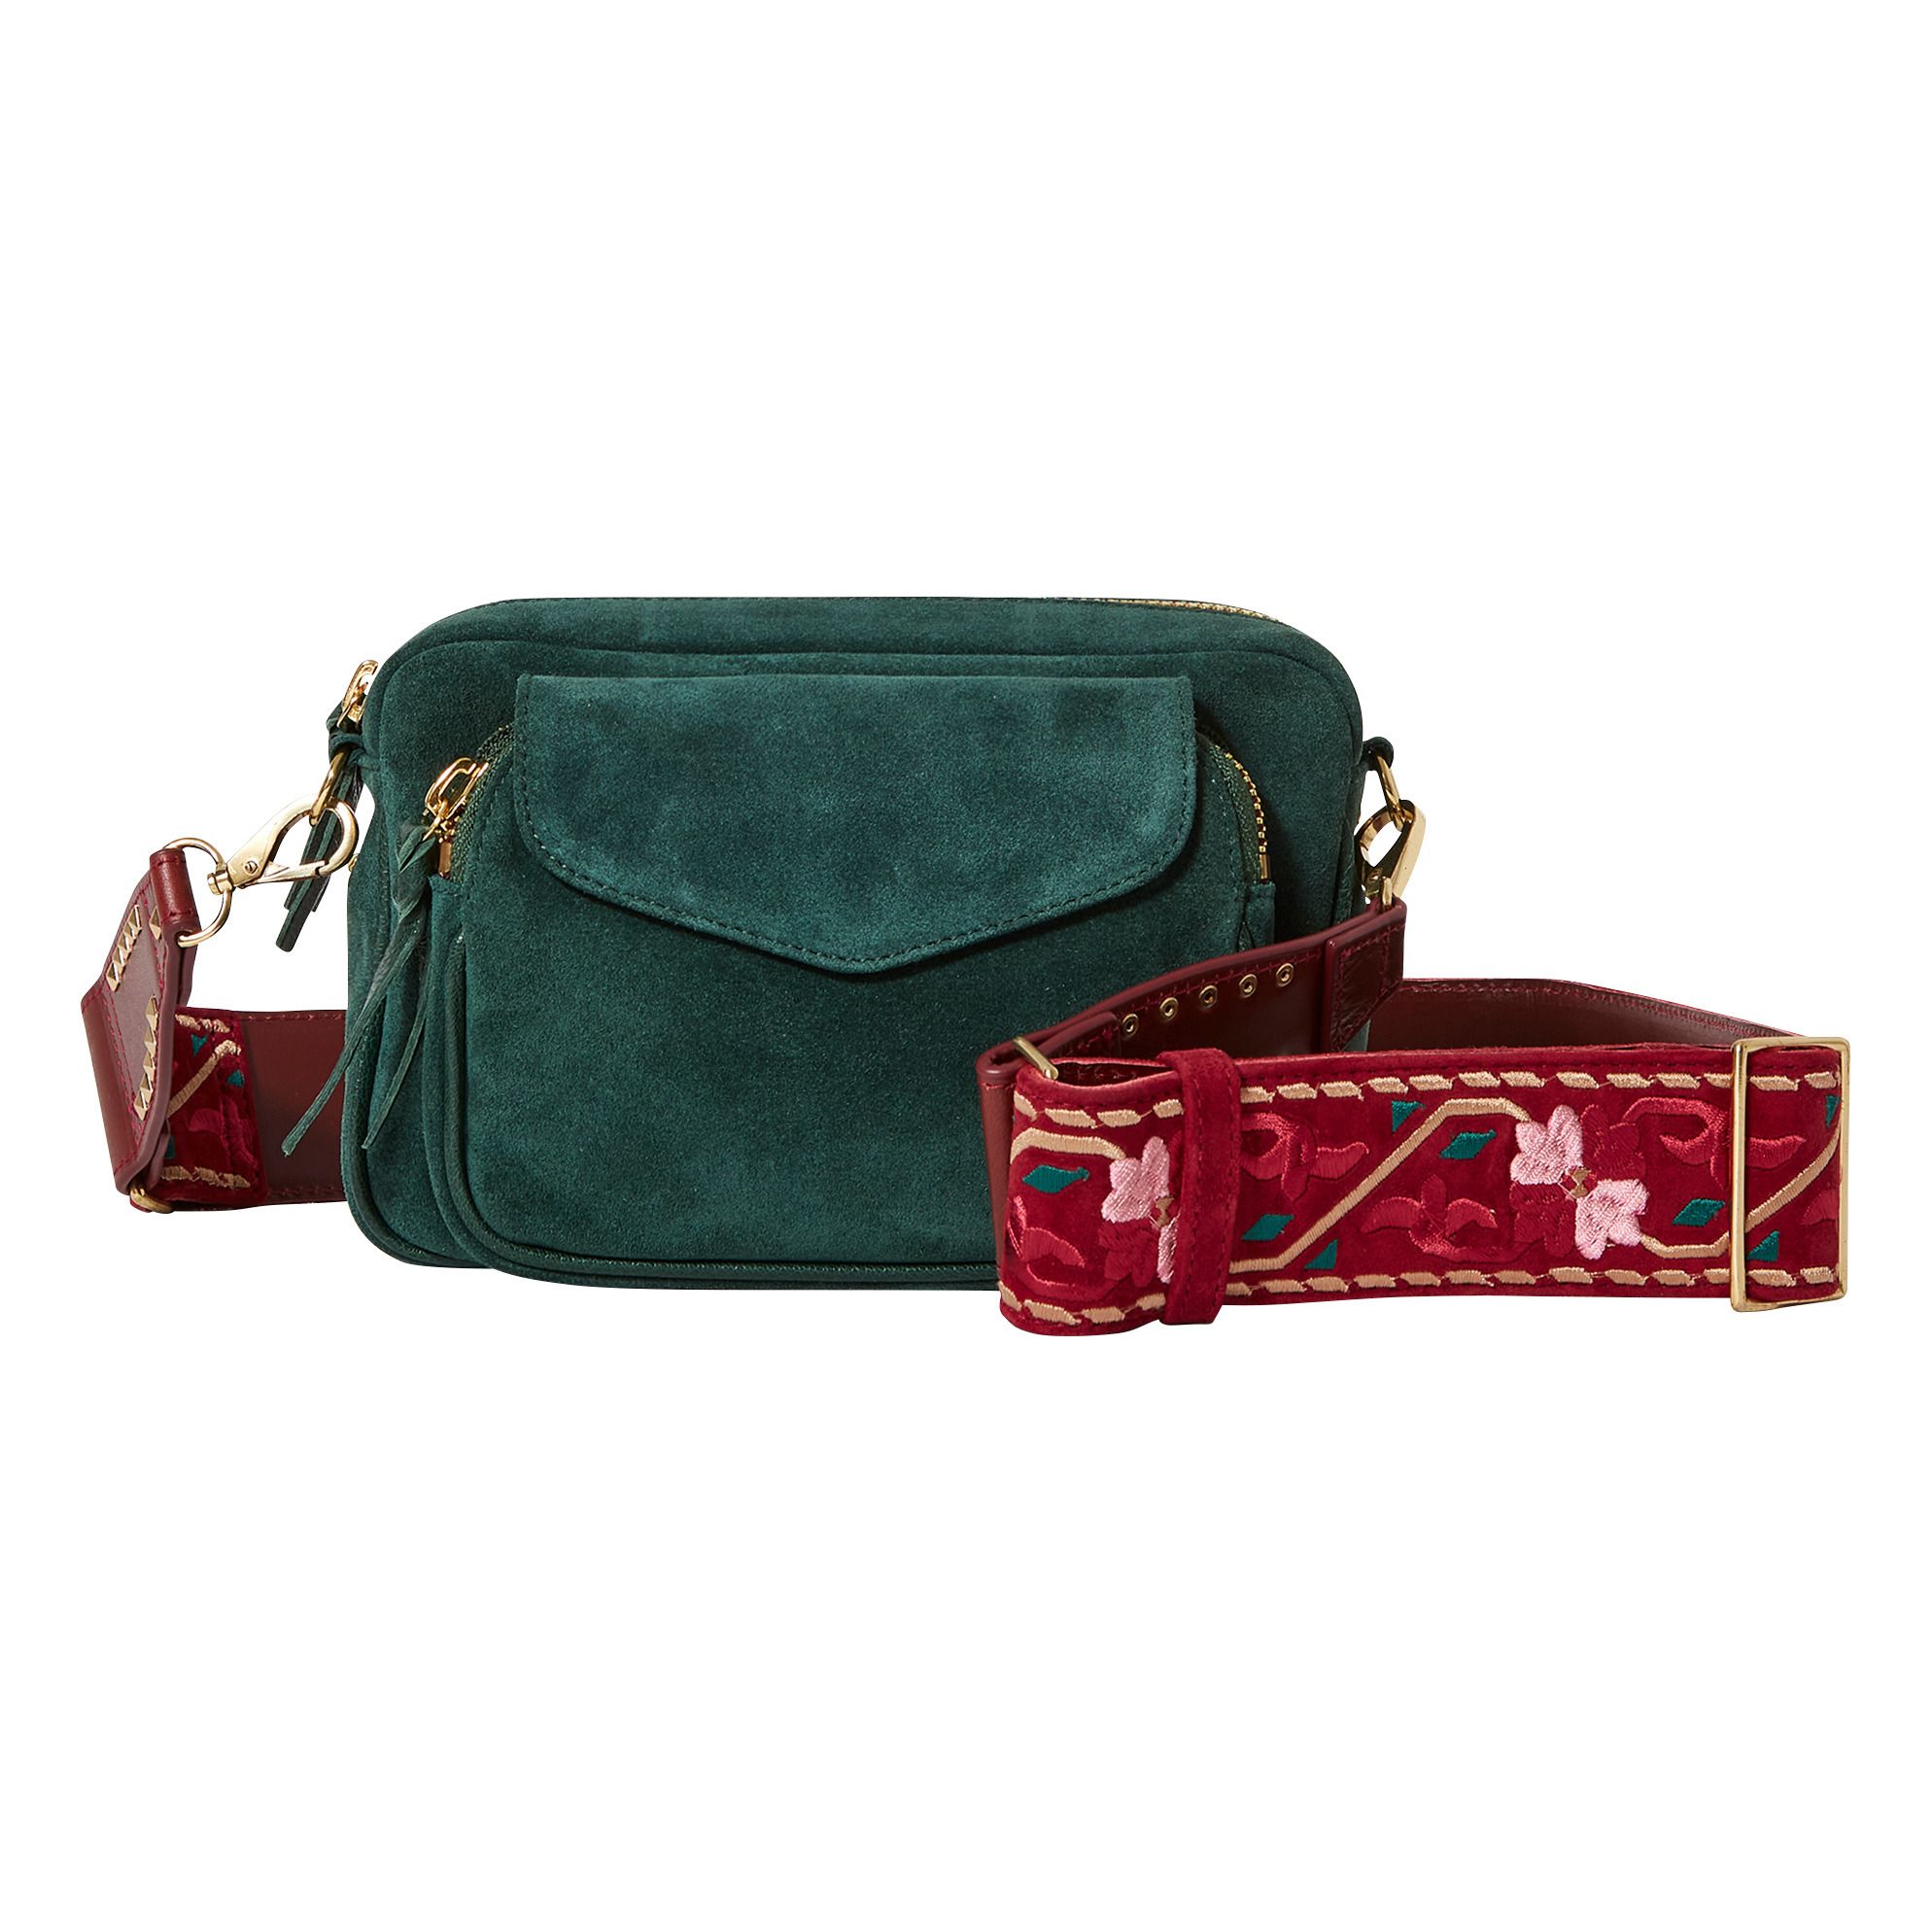 Claris Virot - Sac Suede Charly - Femme - Vert forêt